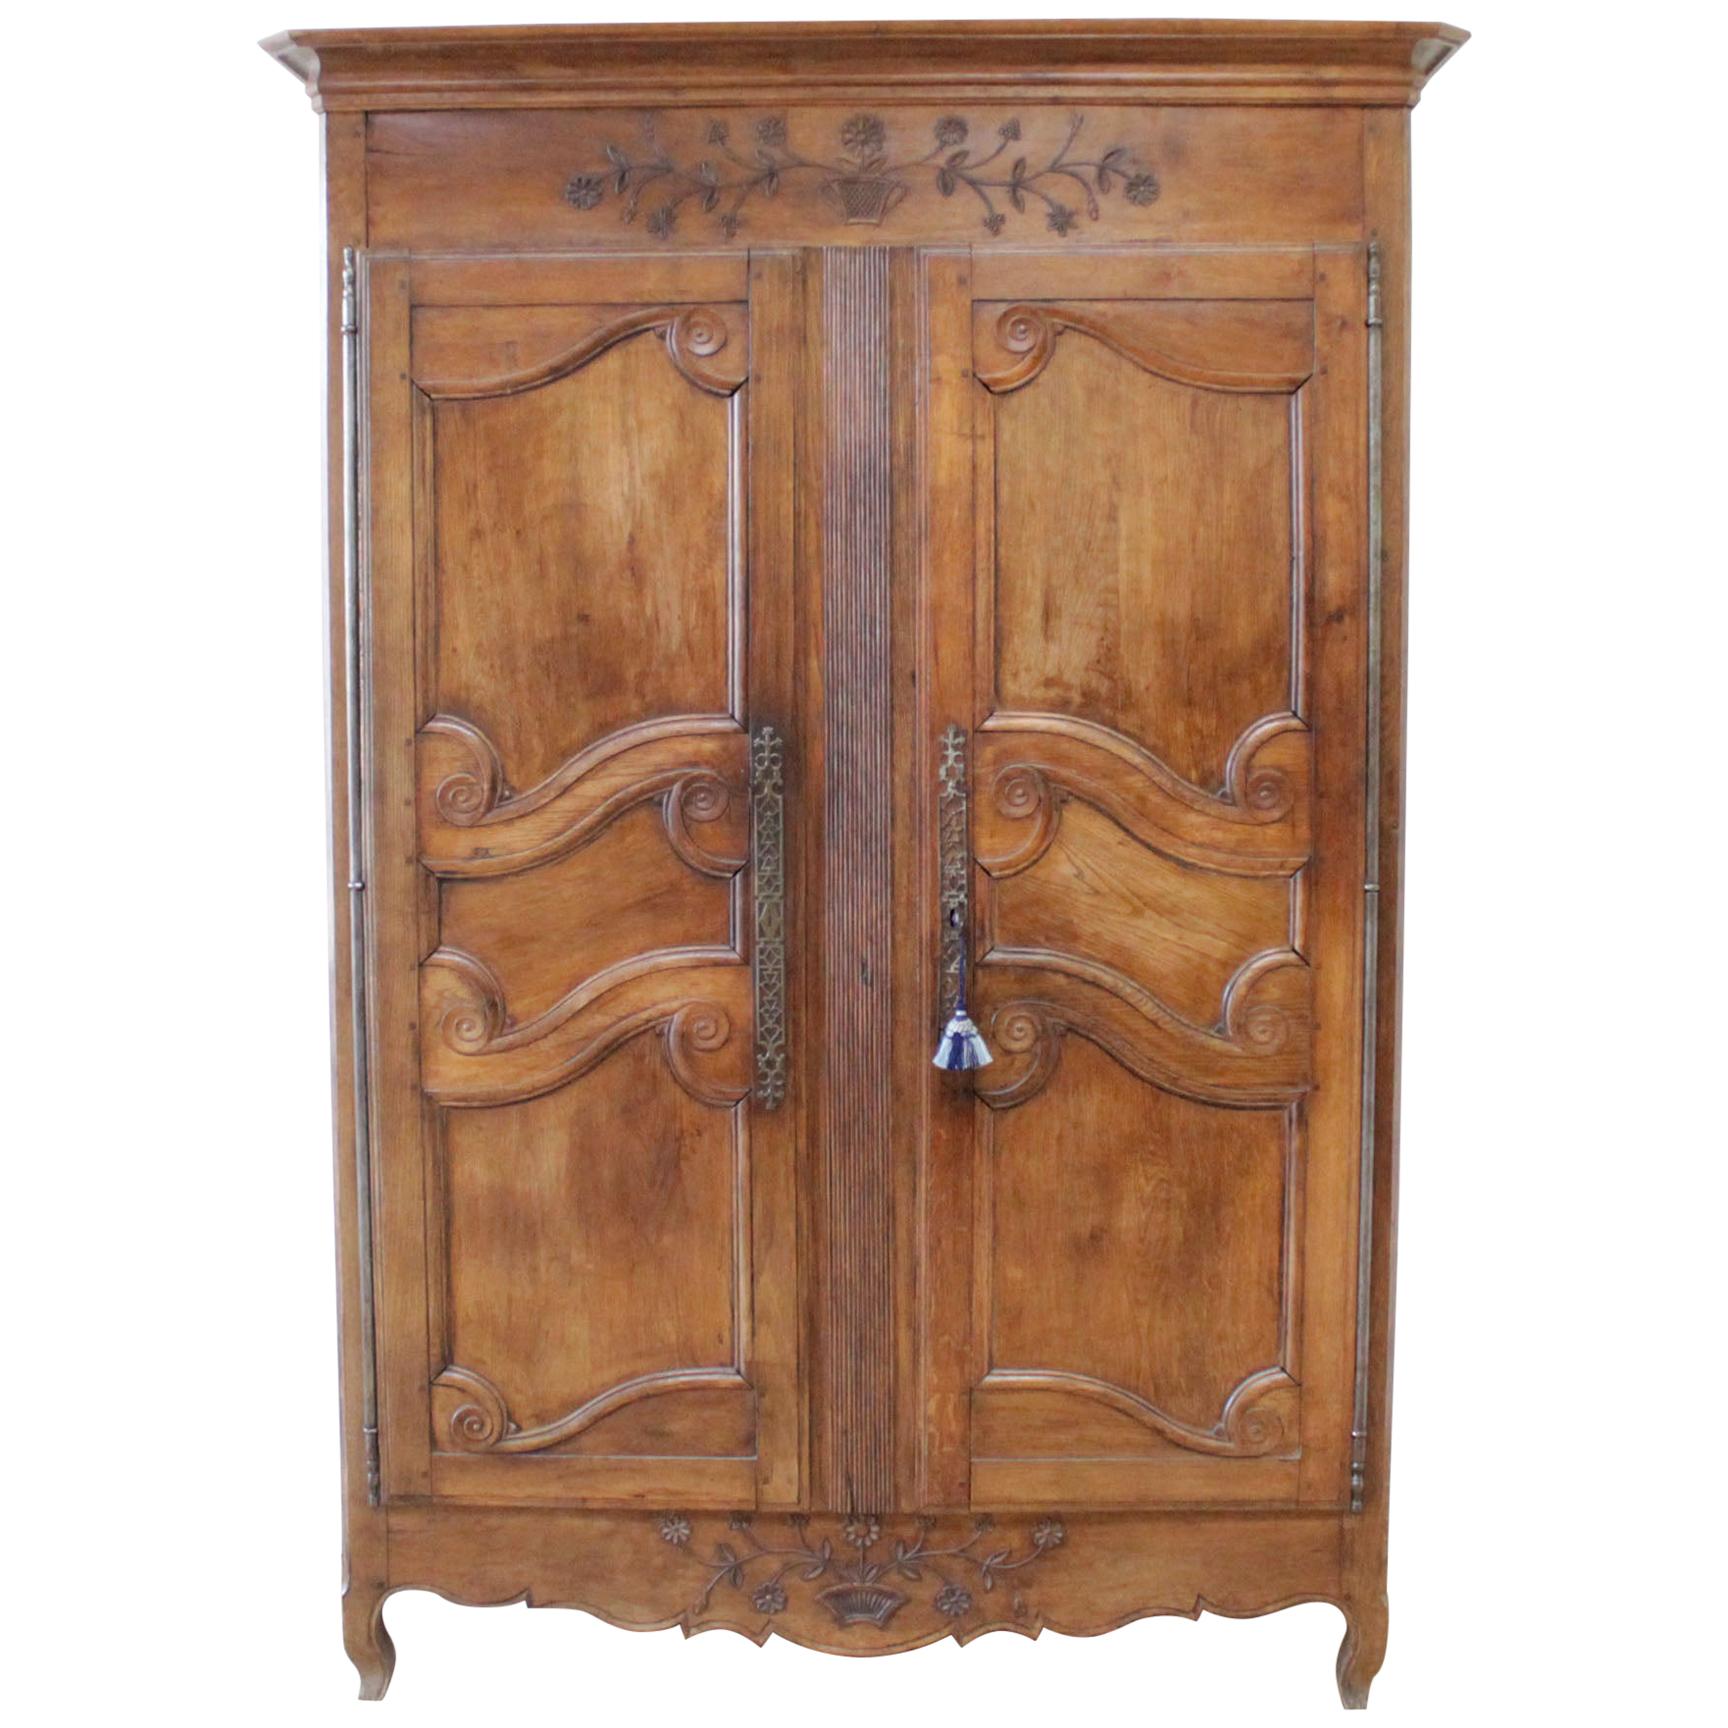 19th Century Carved Walnut French Provincial Armoire Cabinet